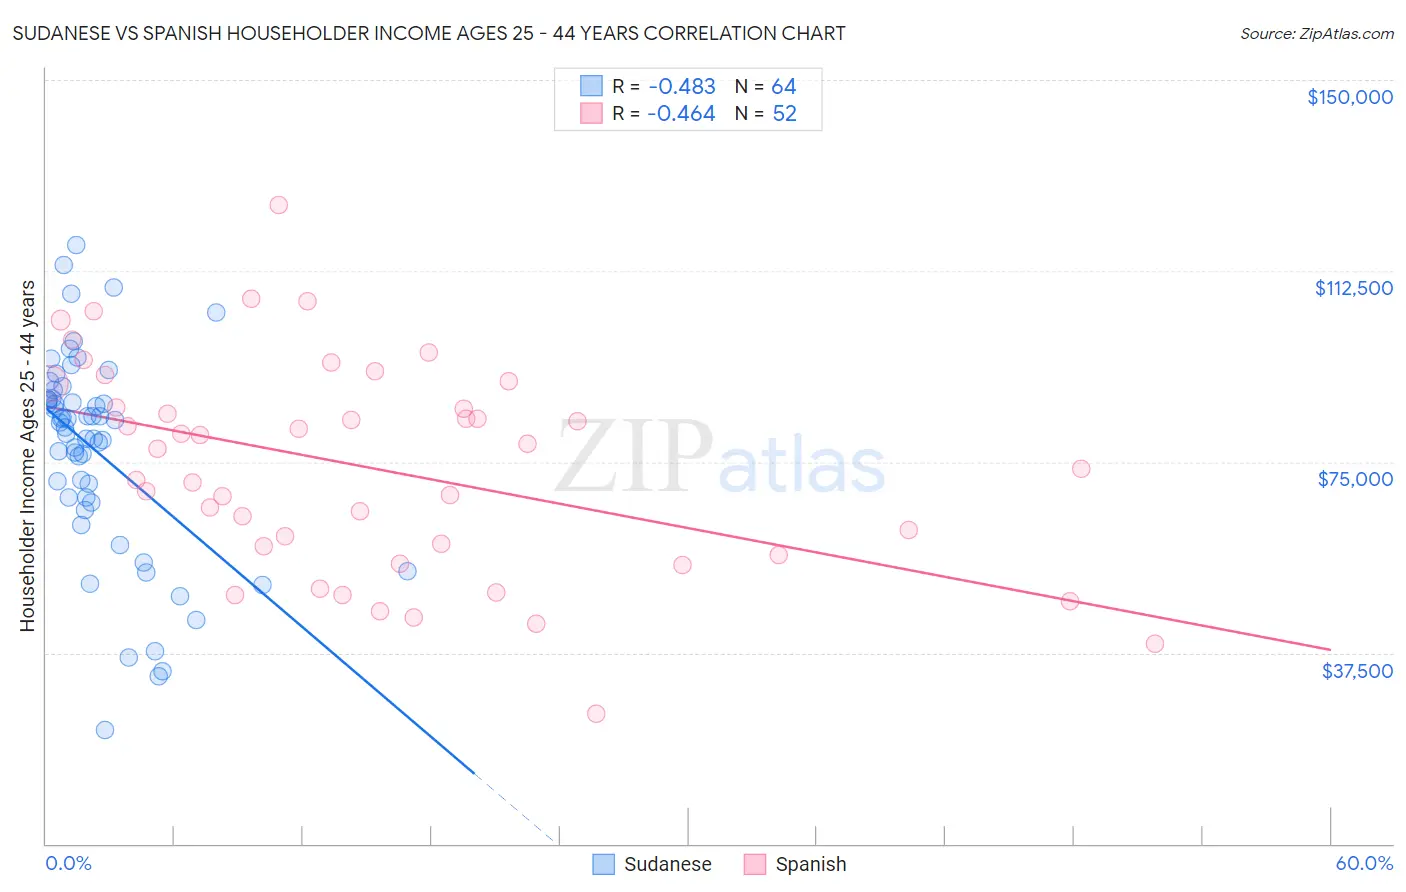 Sudanese vs Spanish Householder Income Ages 25 - 44 years